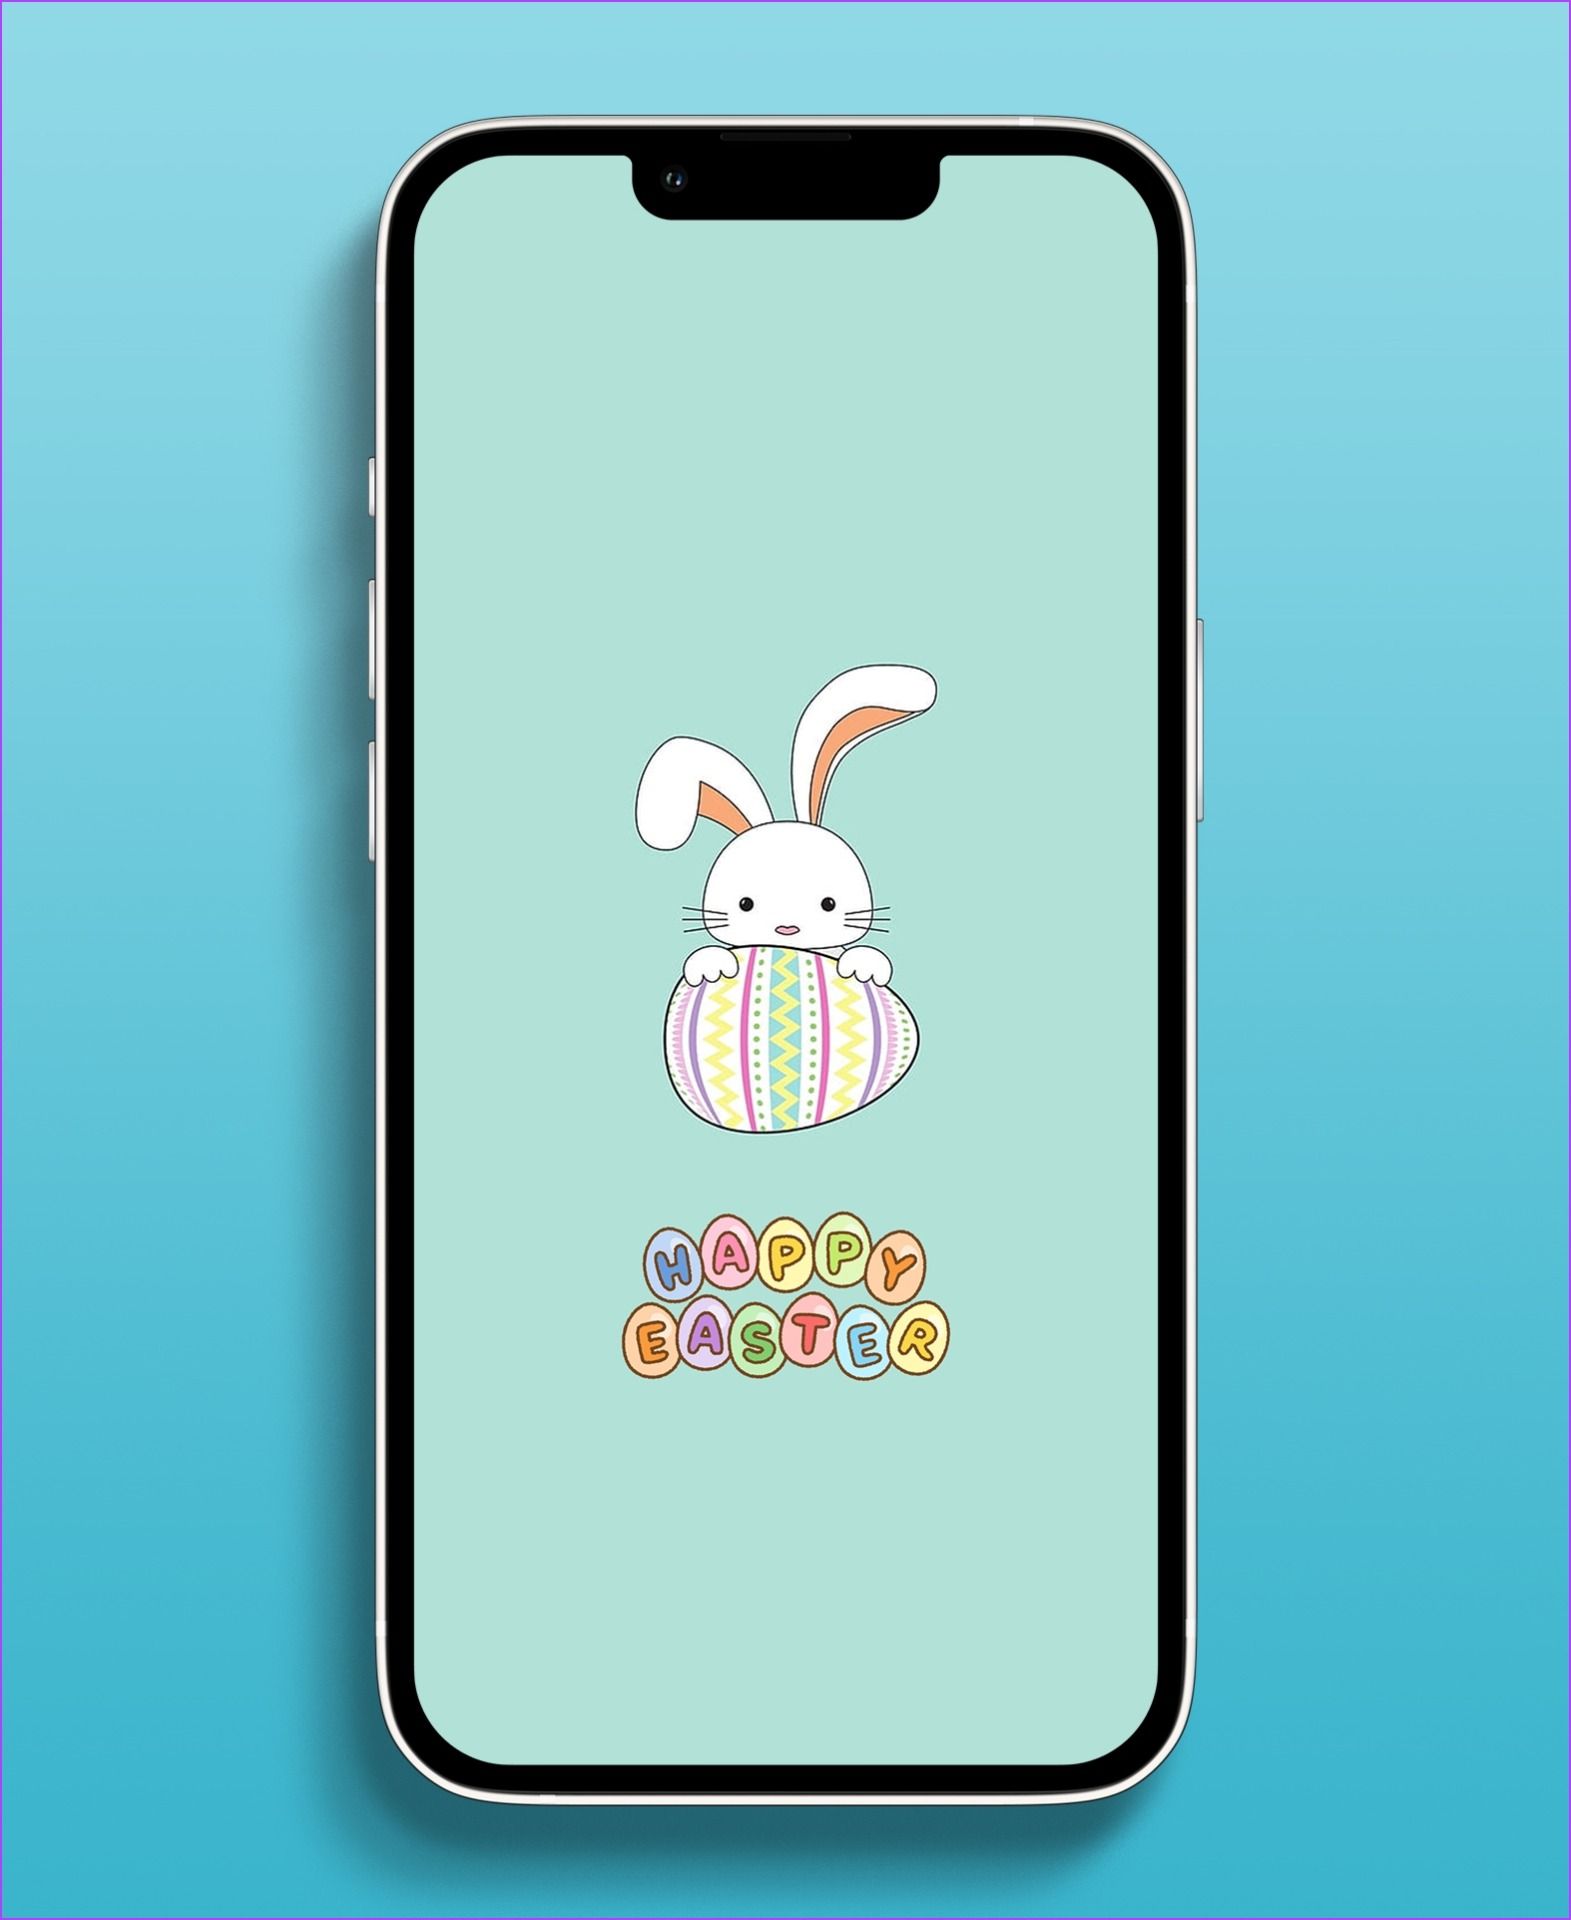 Cute and Free Easter Wallpaper for iPhone